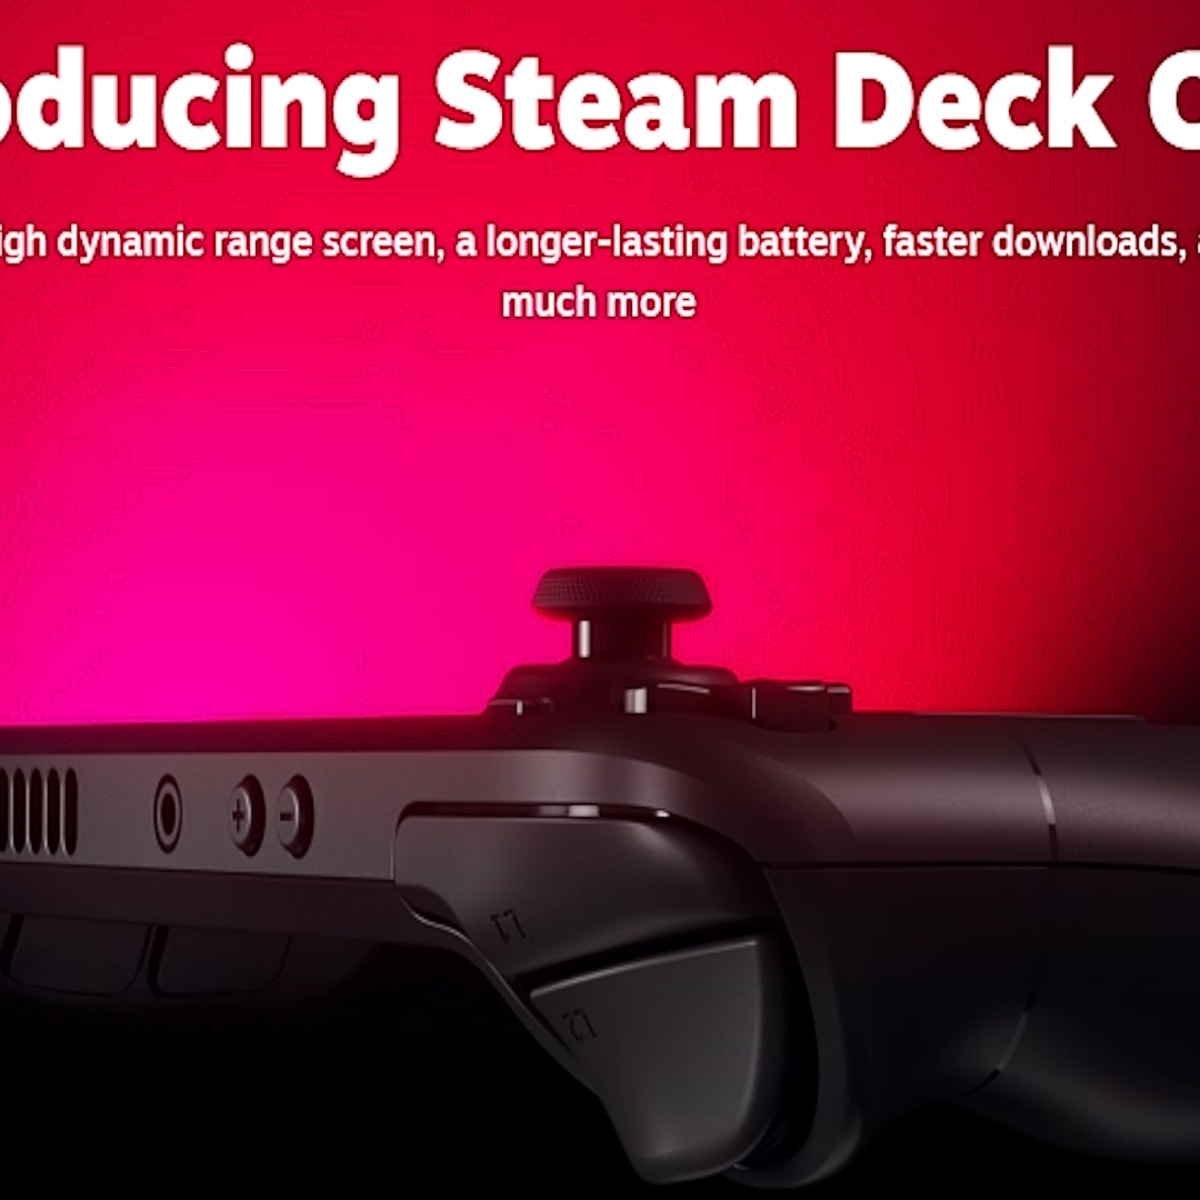 Steam Deck OLED Unveiled with Enhanced Features and Performance To  Revolutionize Gaming - Men's Journal Tech Trends: Stay Ahead with Tech  News, Rumors & Deals